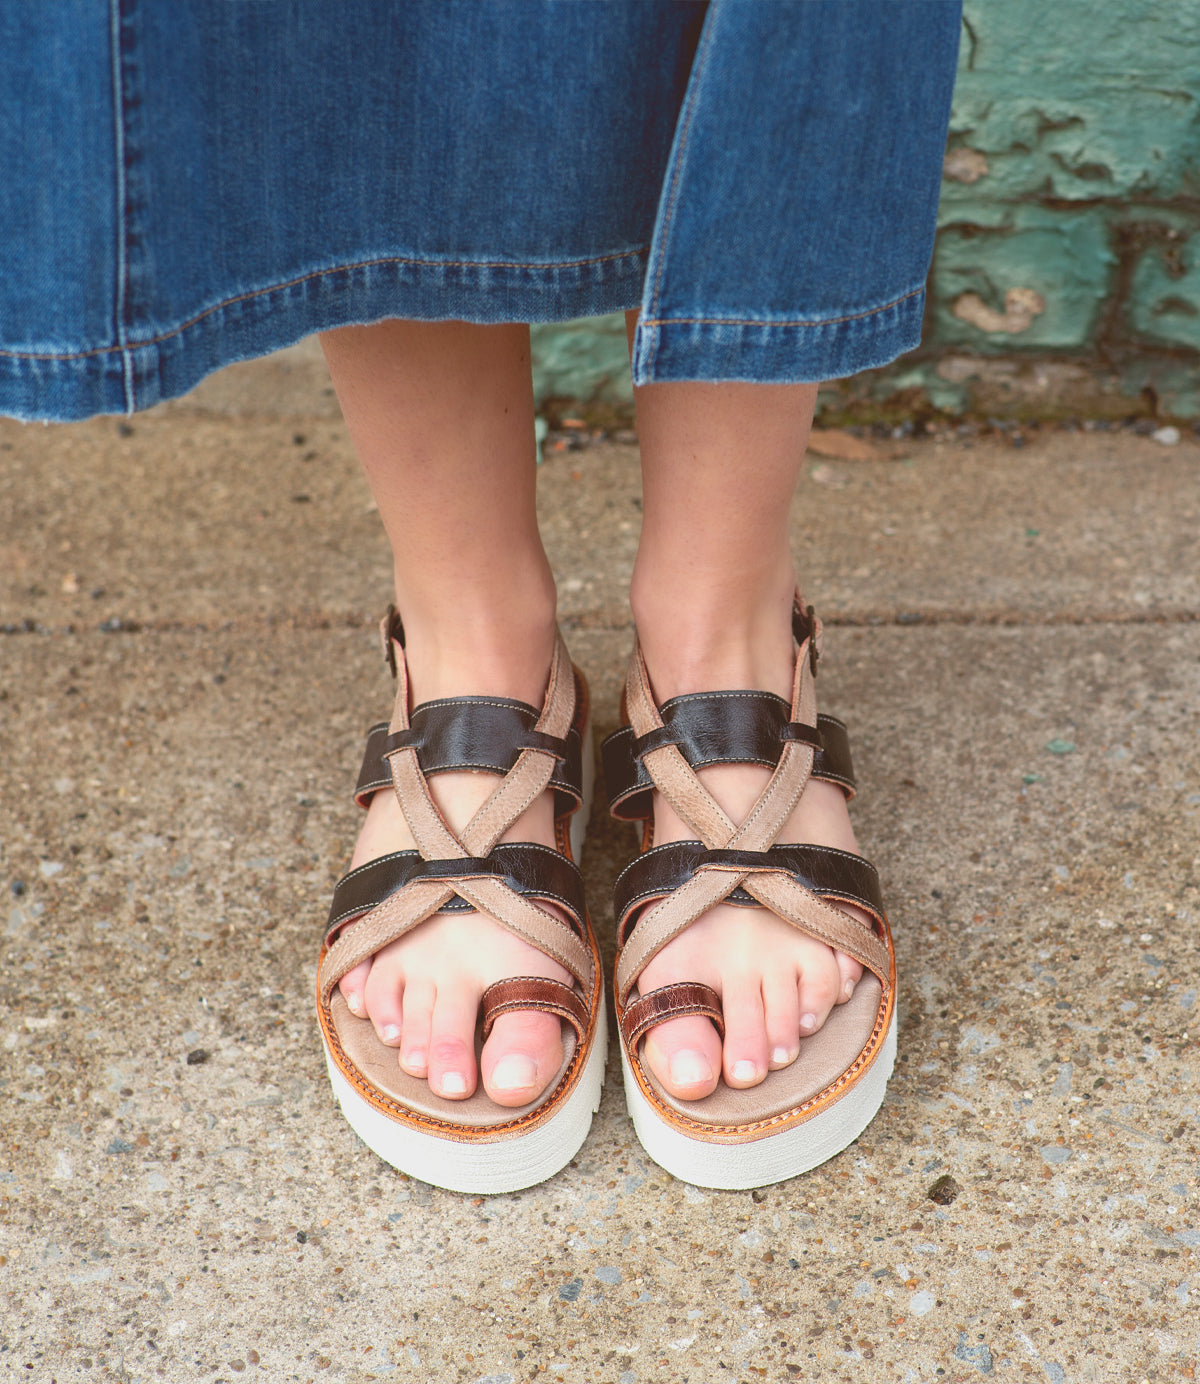 A woman wearing Bed Stu sandals with a strappy upper.